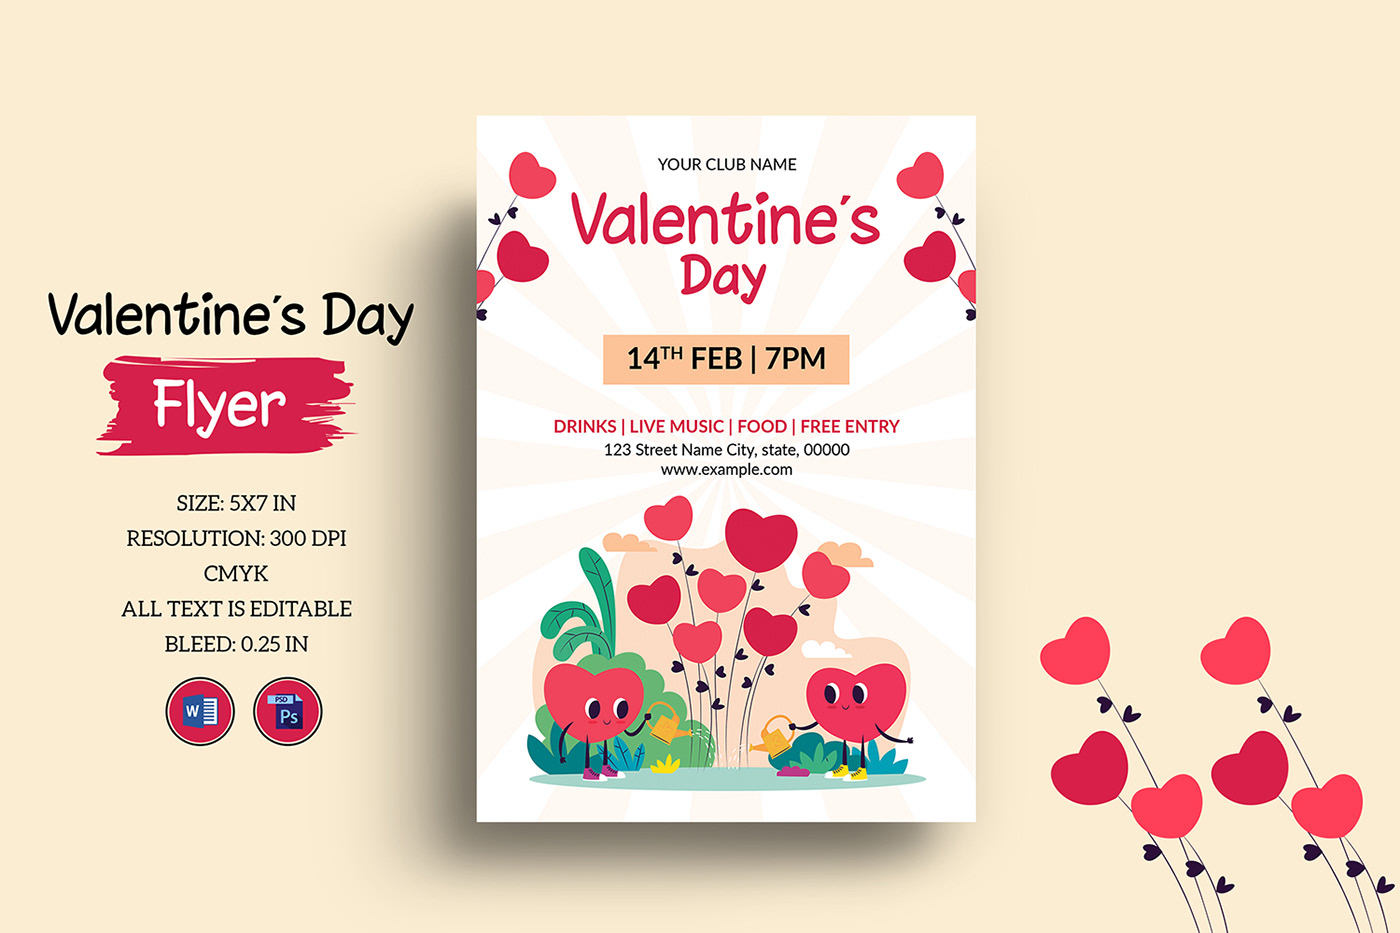 Valentines Party Flyer template  Printable valentines day party invitation template